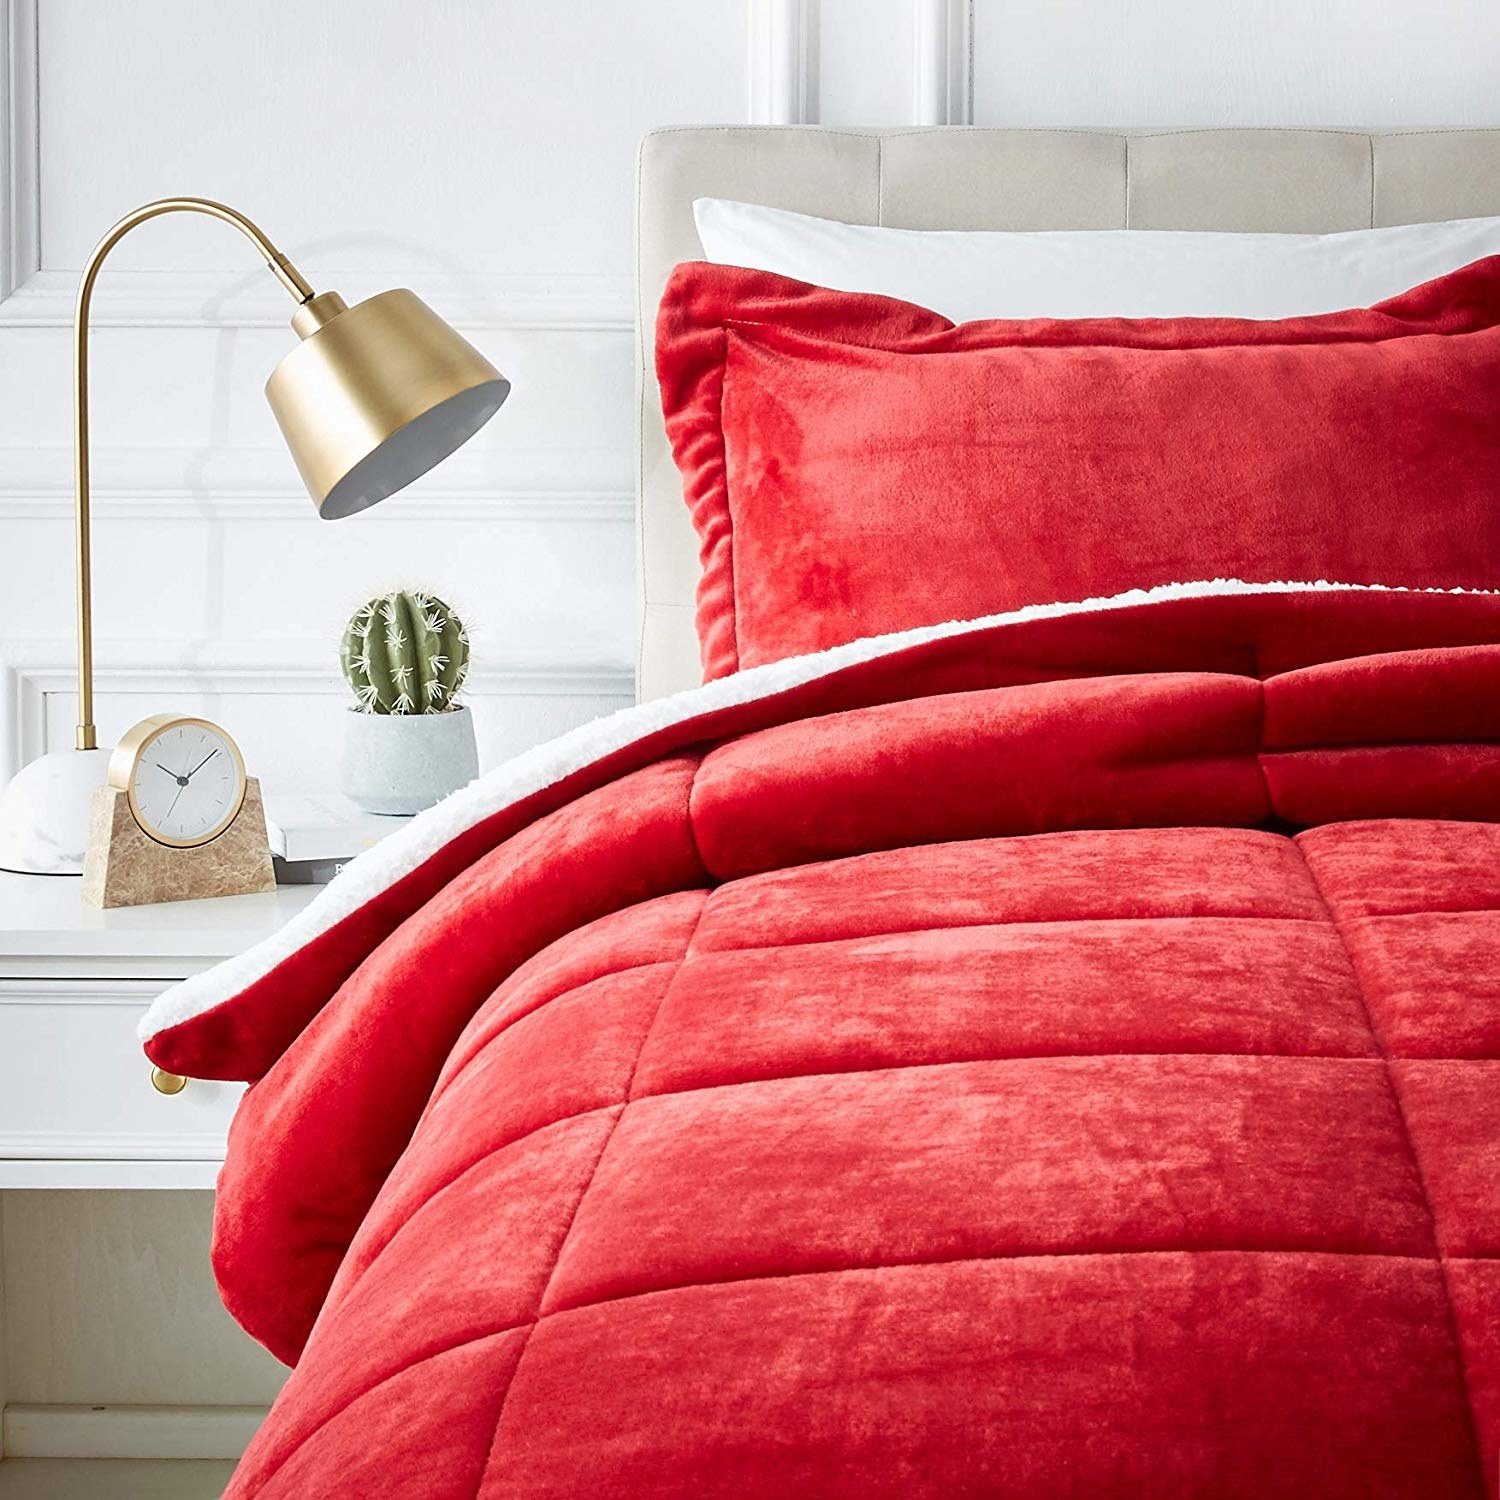 Bright red bedding in plush, quilted pattern 